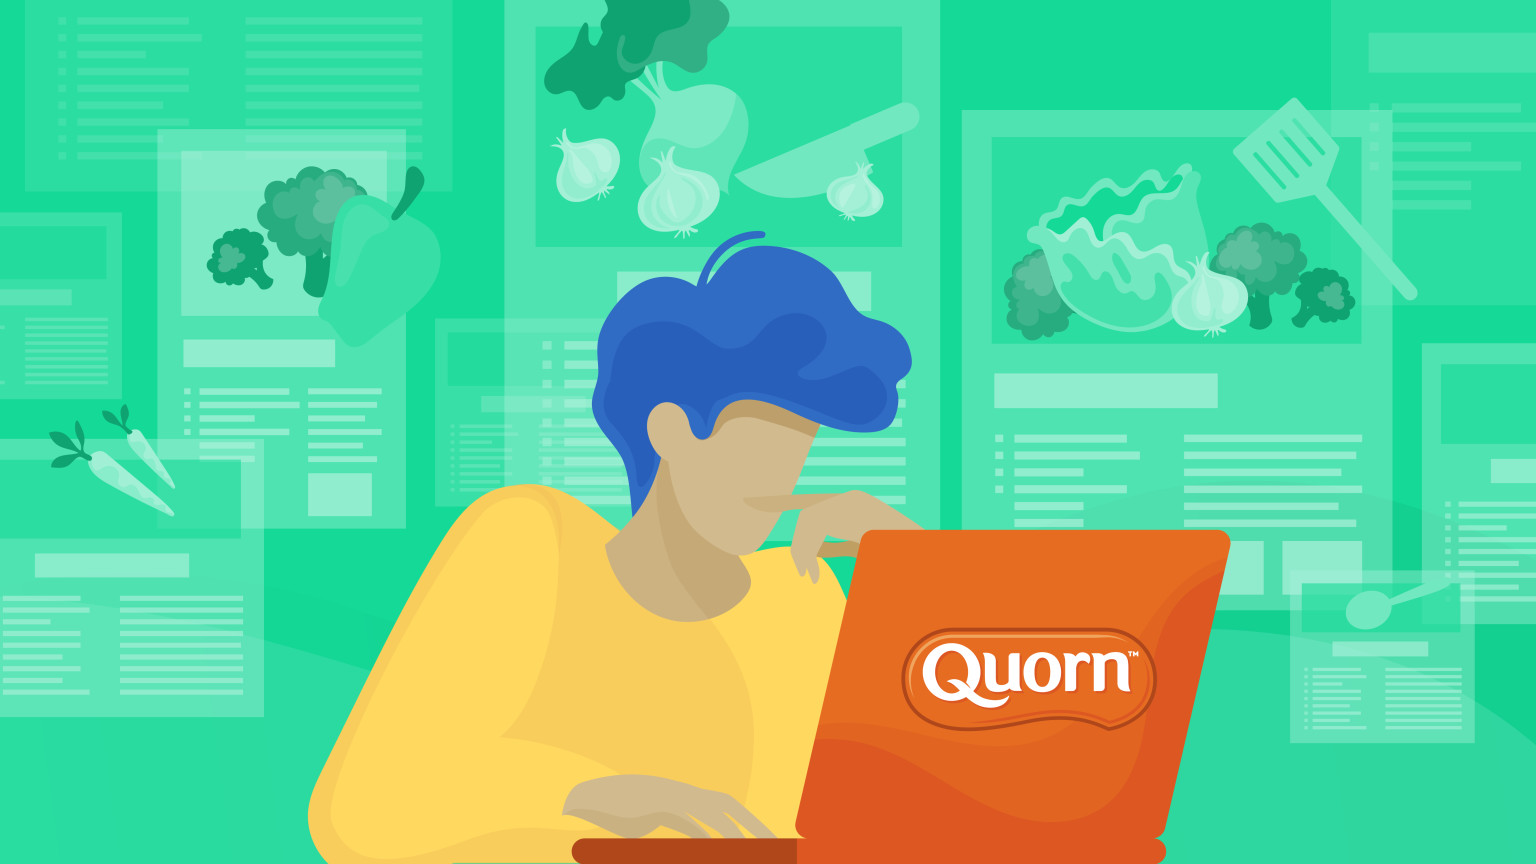 Illustration of person at a computer with Quorn illustrations behind the individual.